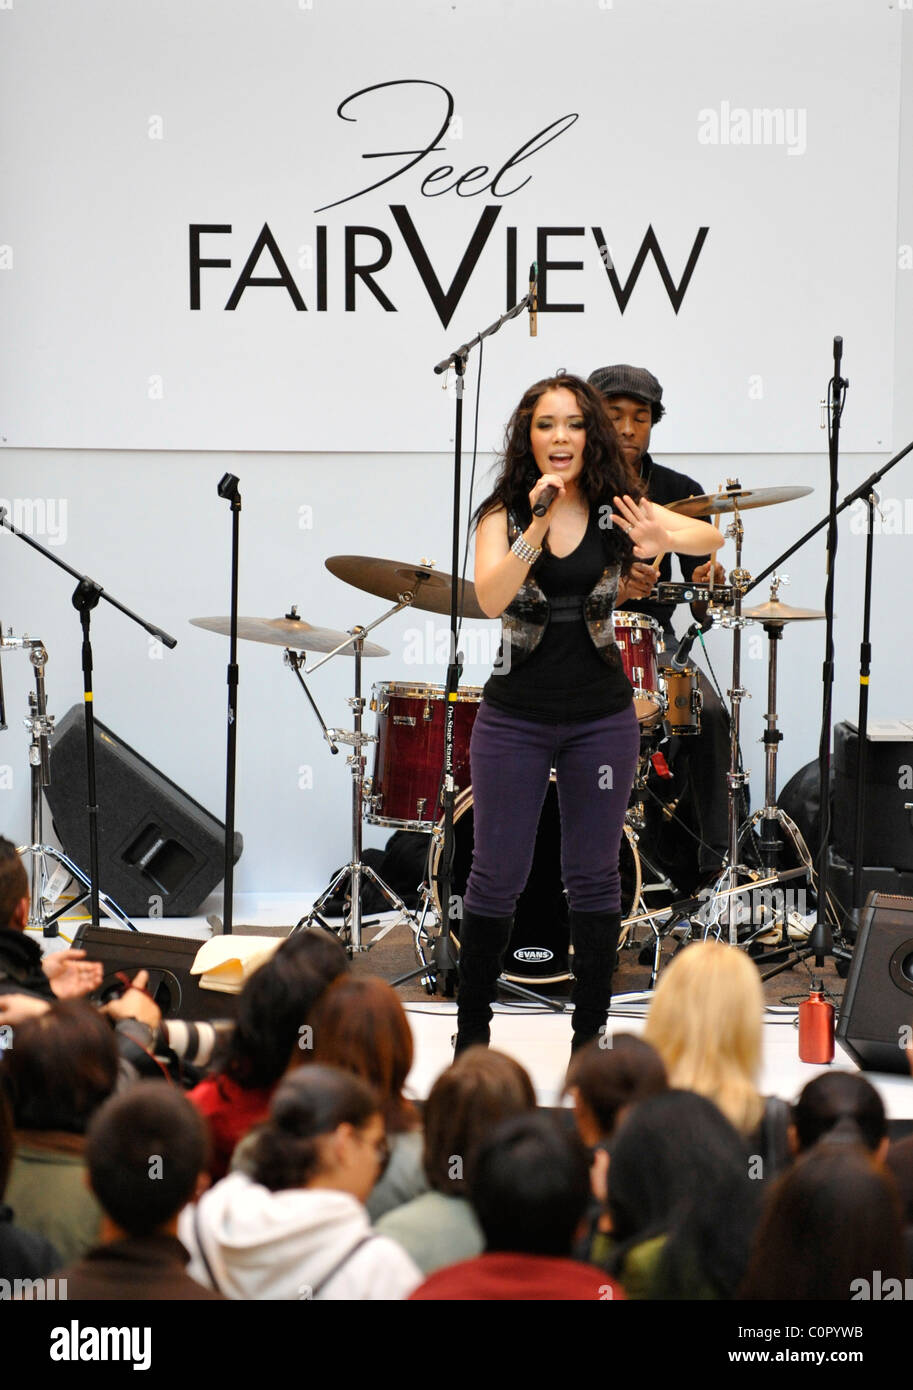 Canadian R&B Singer Kreesha Turner performs at the Grand Re-opening of  Fairview Mall Toronto Canada - 12.11.08 Stock Photo